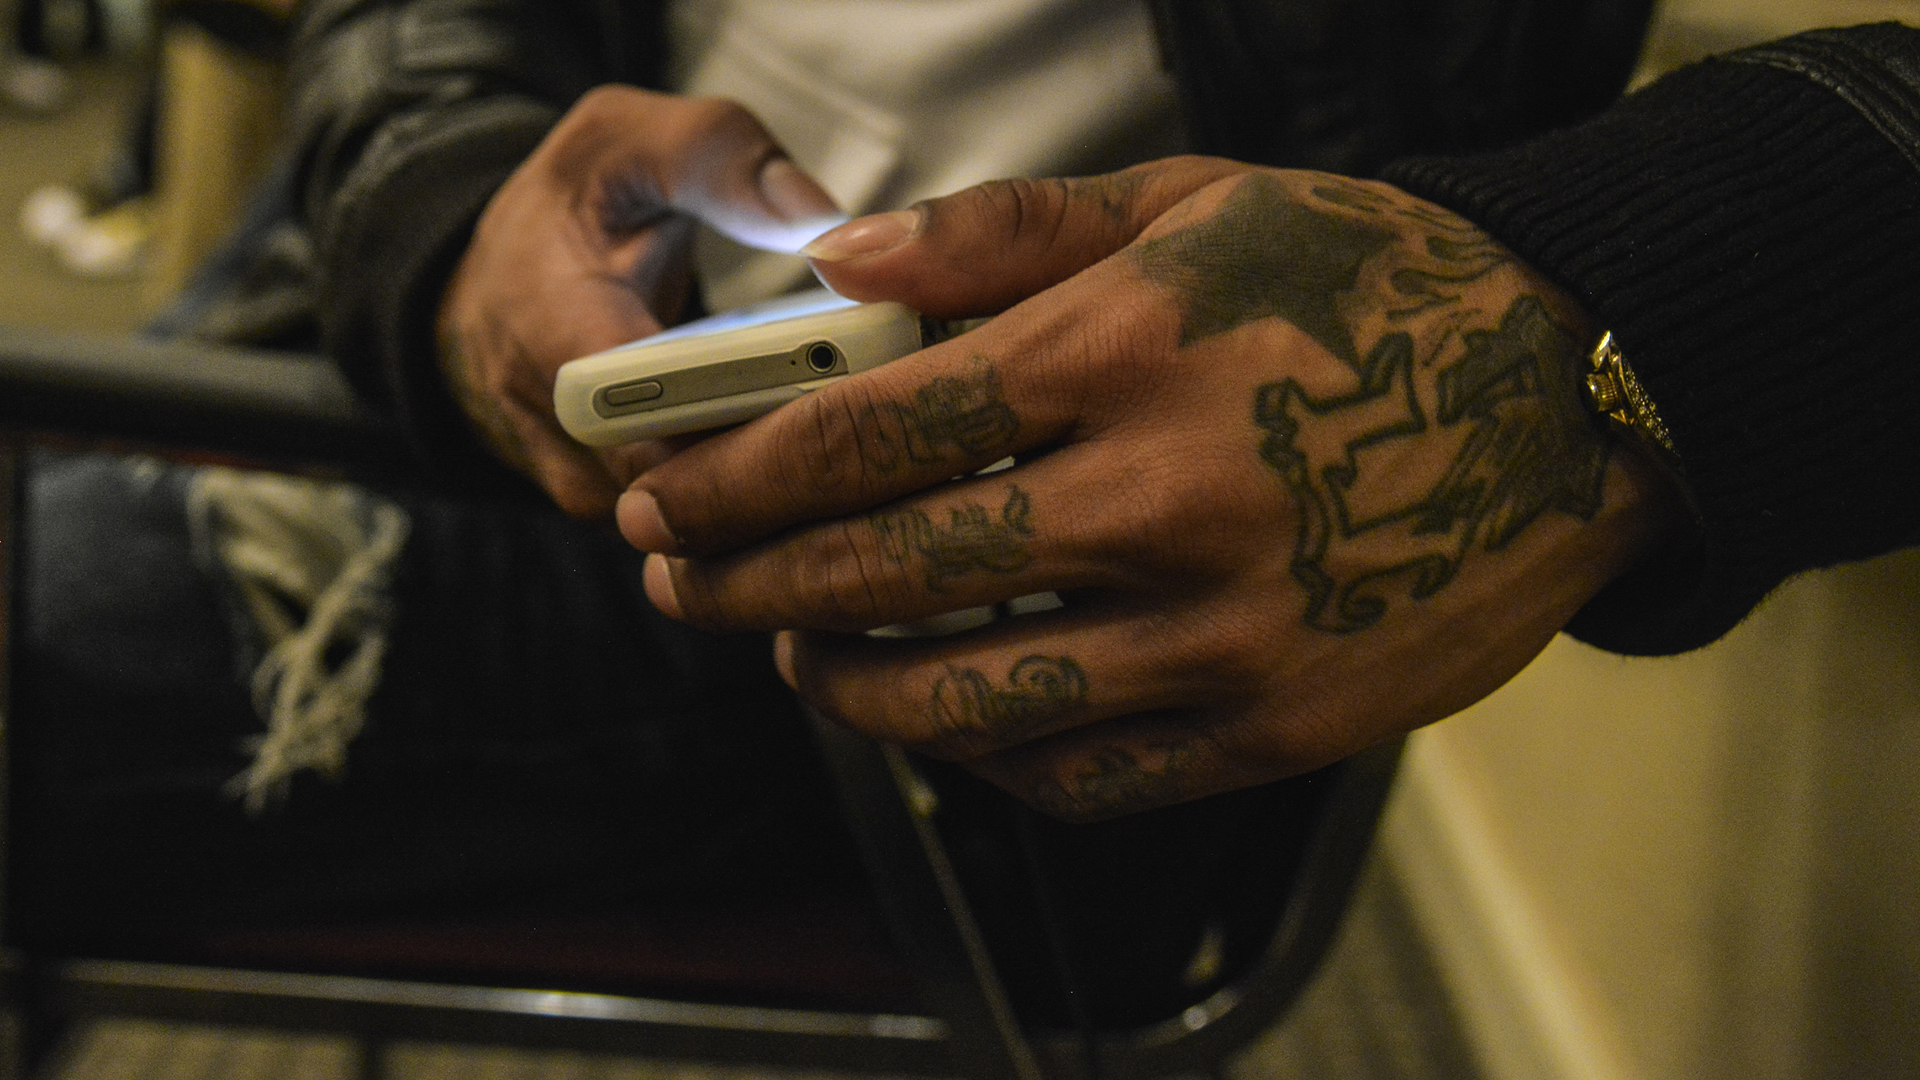 What It's Like to Work an iPhone After Being in Prison for 25 Years